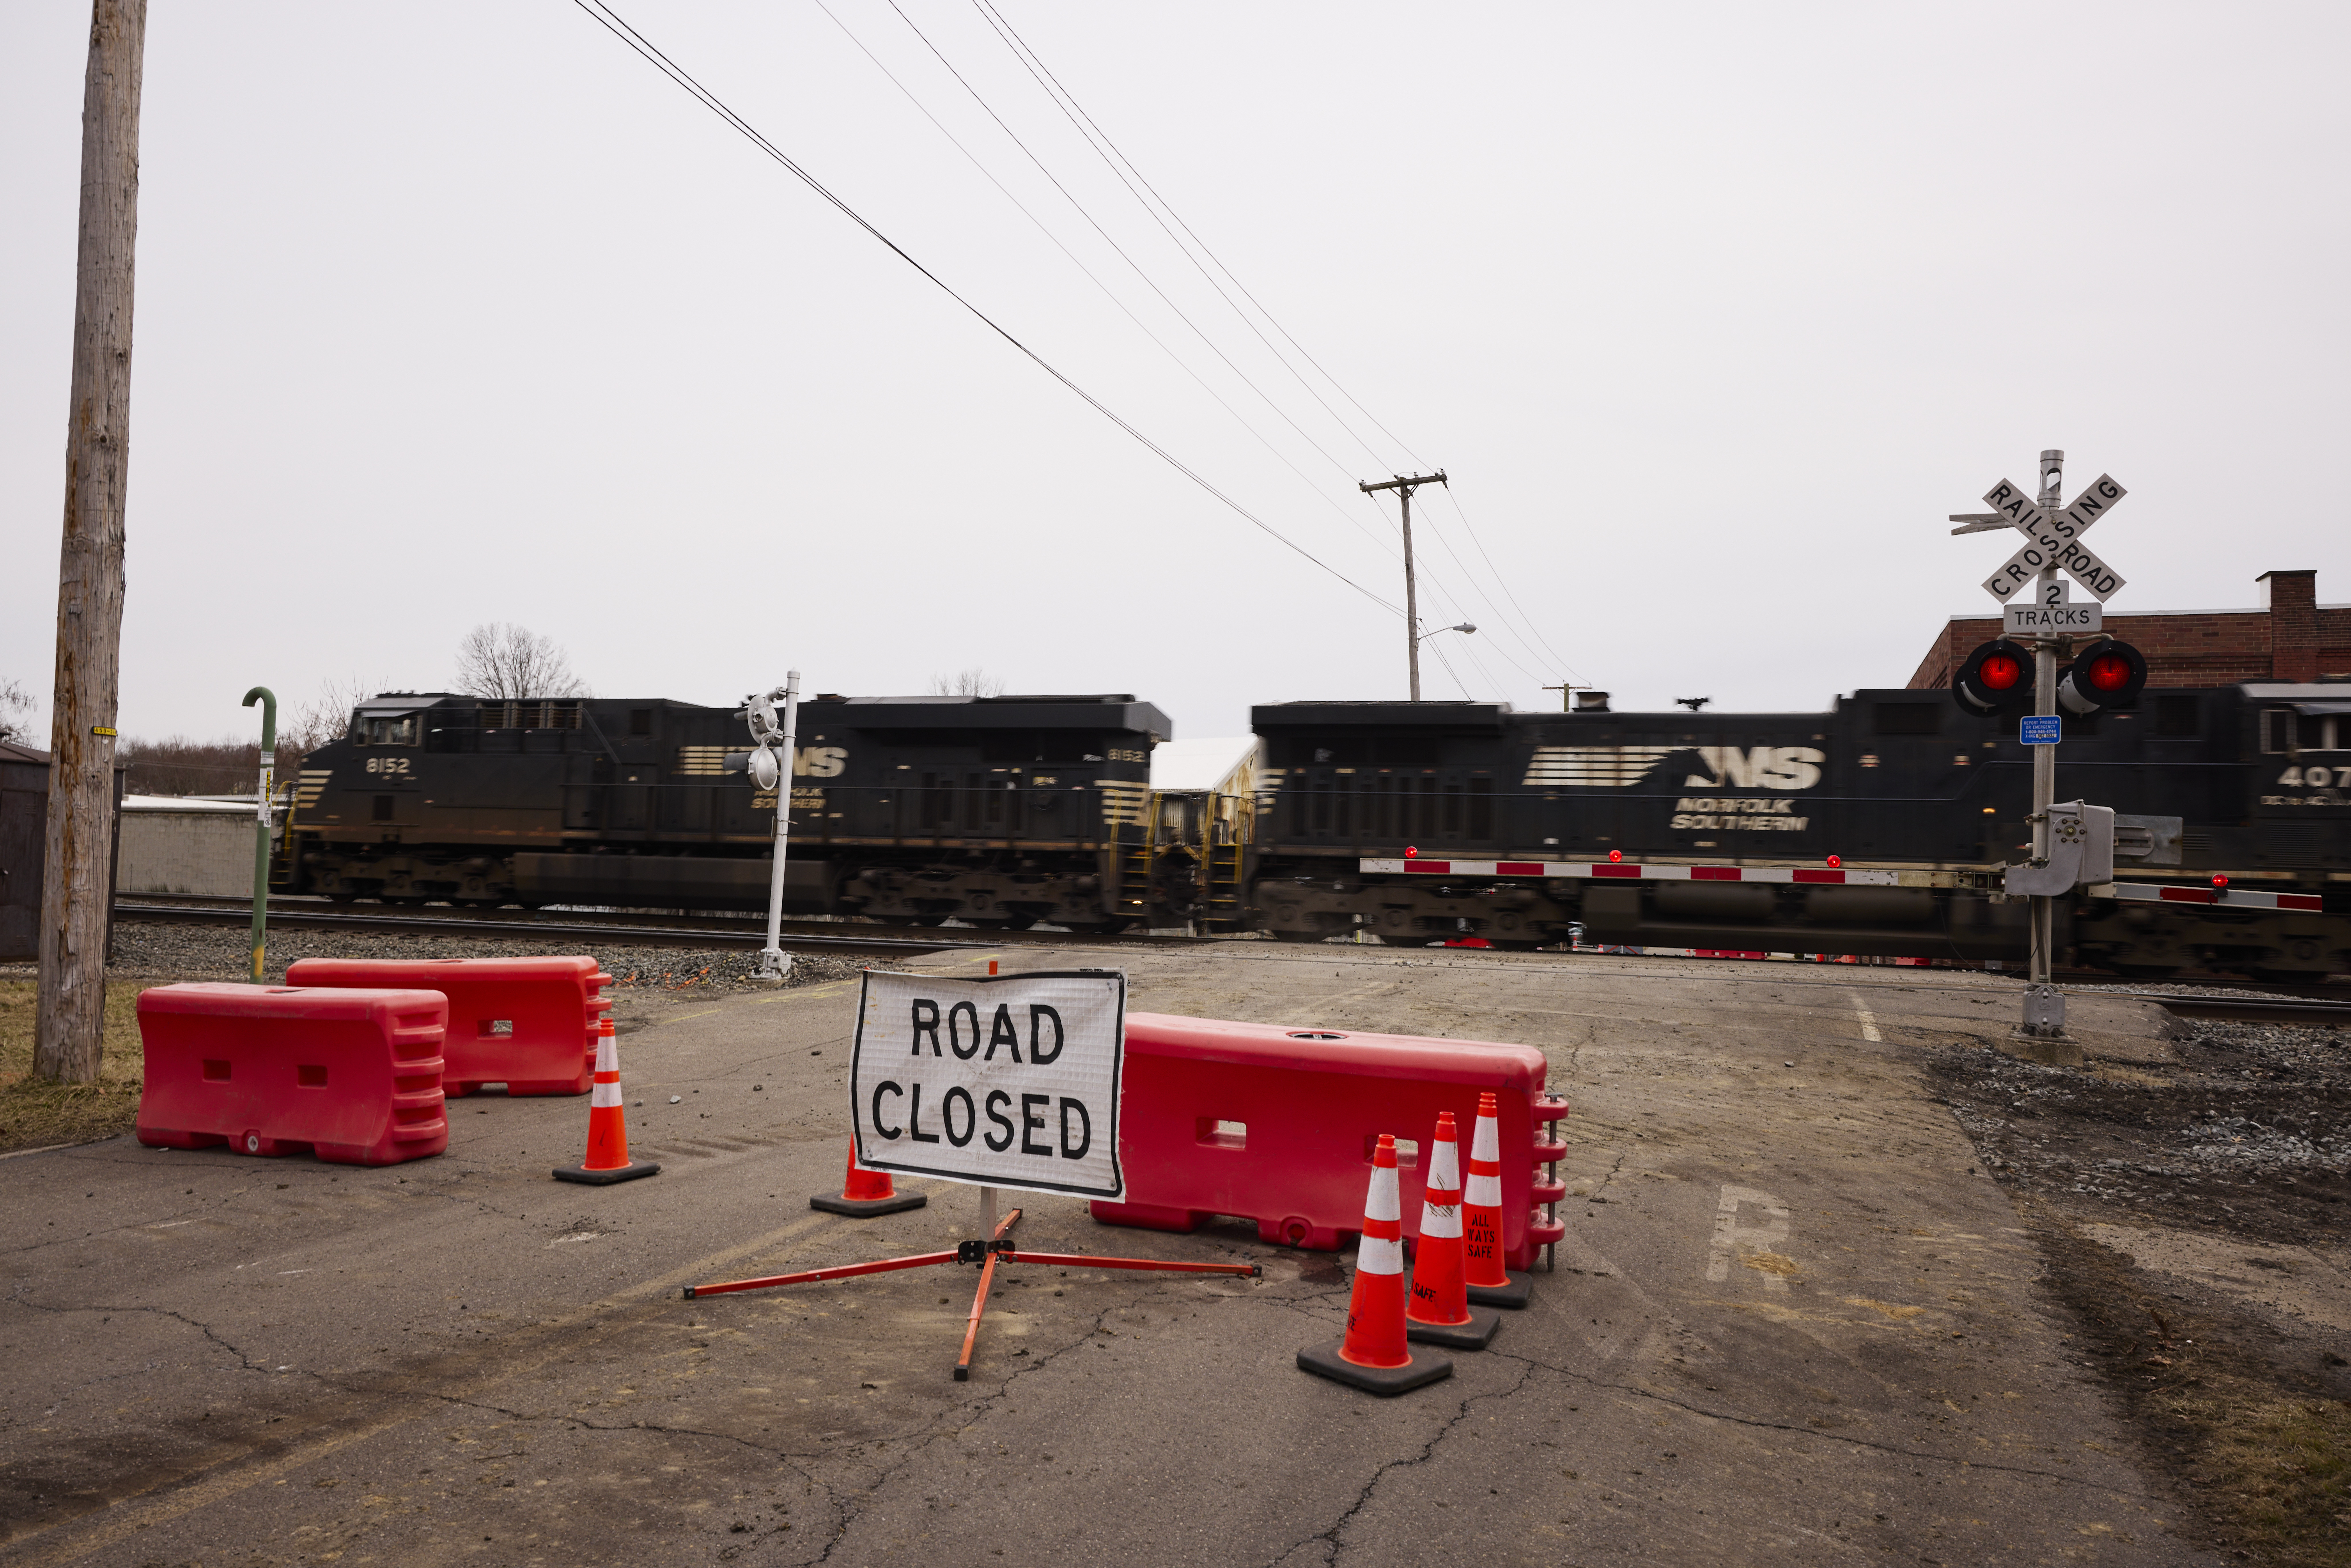 A Norfolk Southern train is en route near where another train by the company derailed, on February 14, 2023 in East Palestine, Ohio.